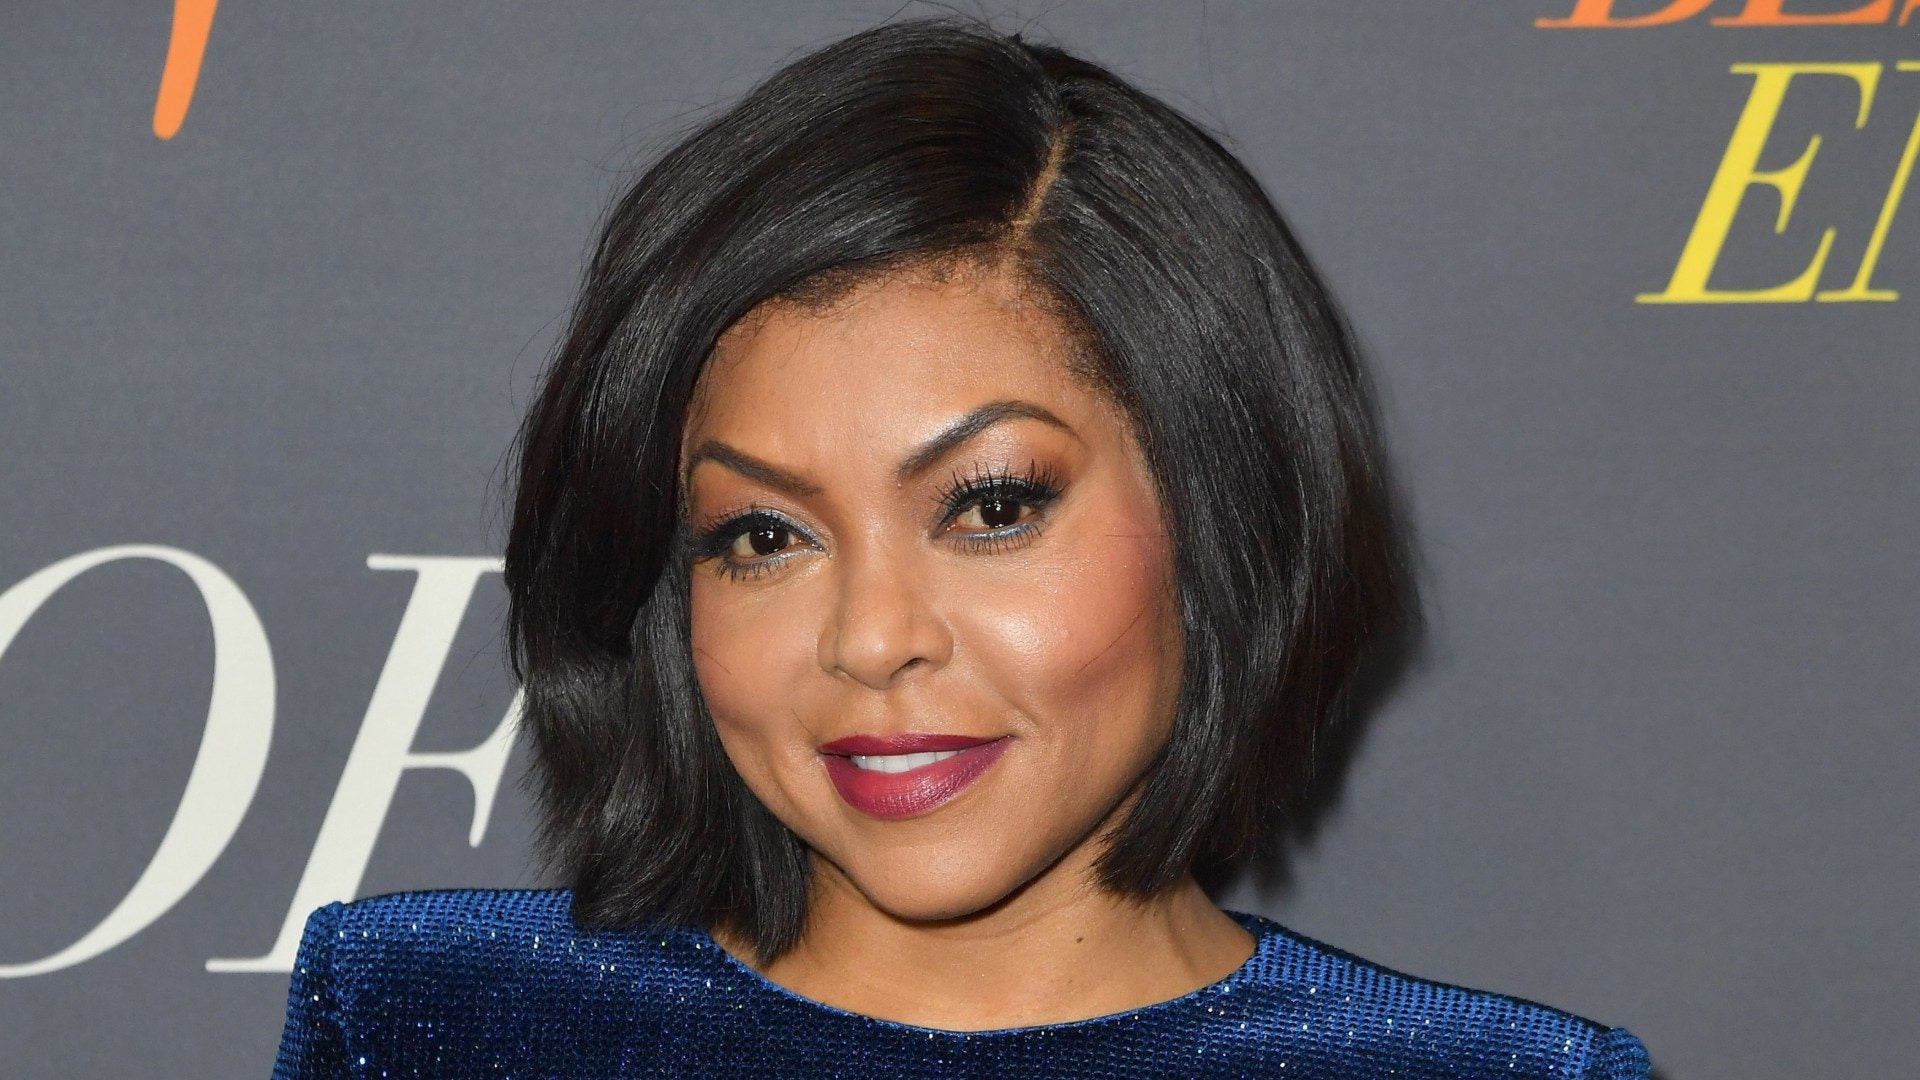   Taraji P. Henson has signed on to make her feature directorial d...